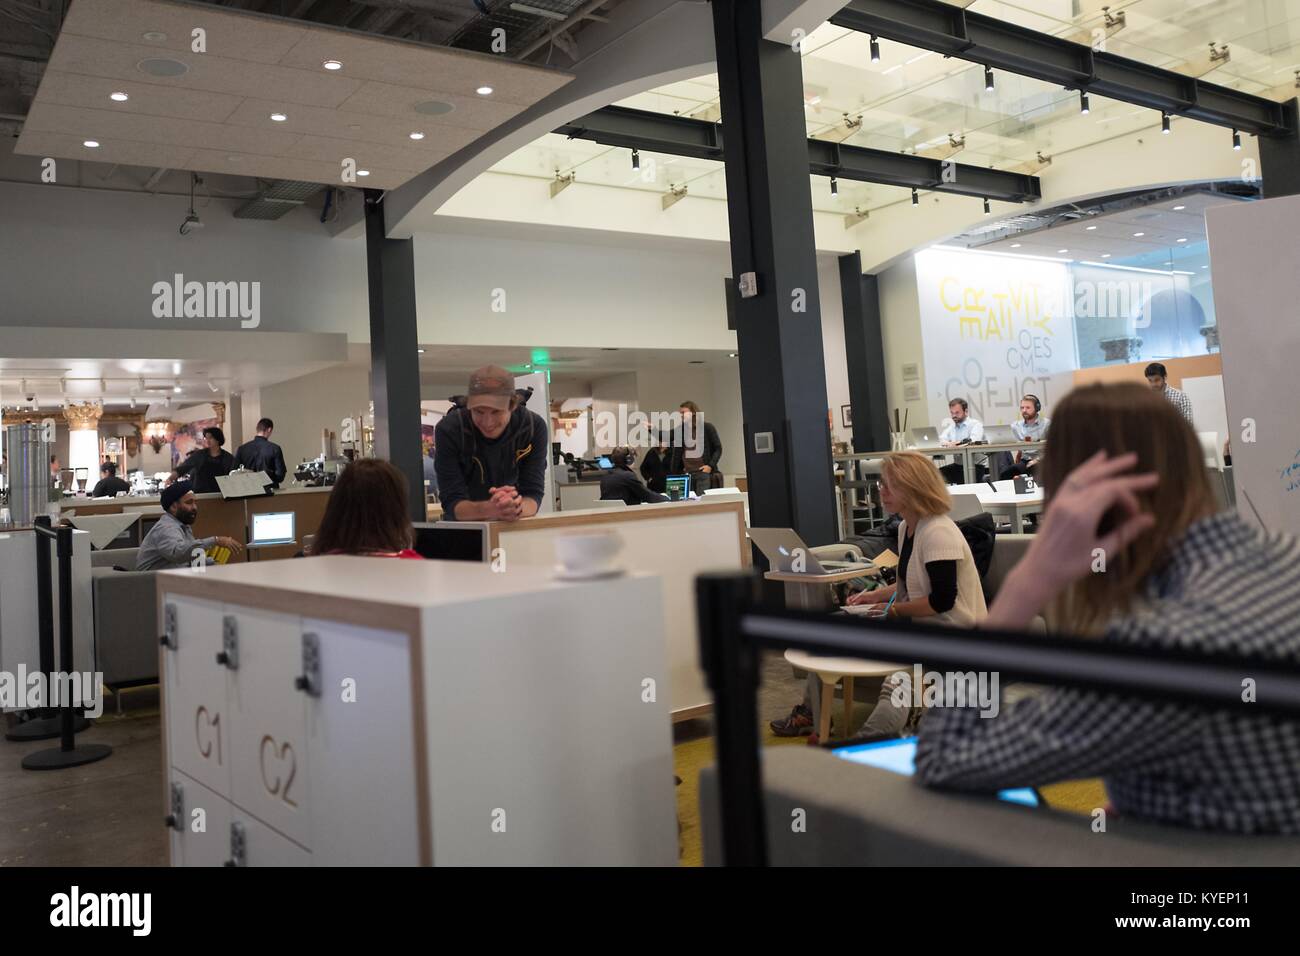 SAP HanaHaus co-working space at the Blue Bottle Coffee shop in Silicon Valley, Palo Alto, California, part of an adaptive reuse which turned the former Varsity Theater into an upscale cafe and HanaHouse co-working space, November 14, 2017. () Stock Photo